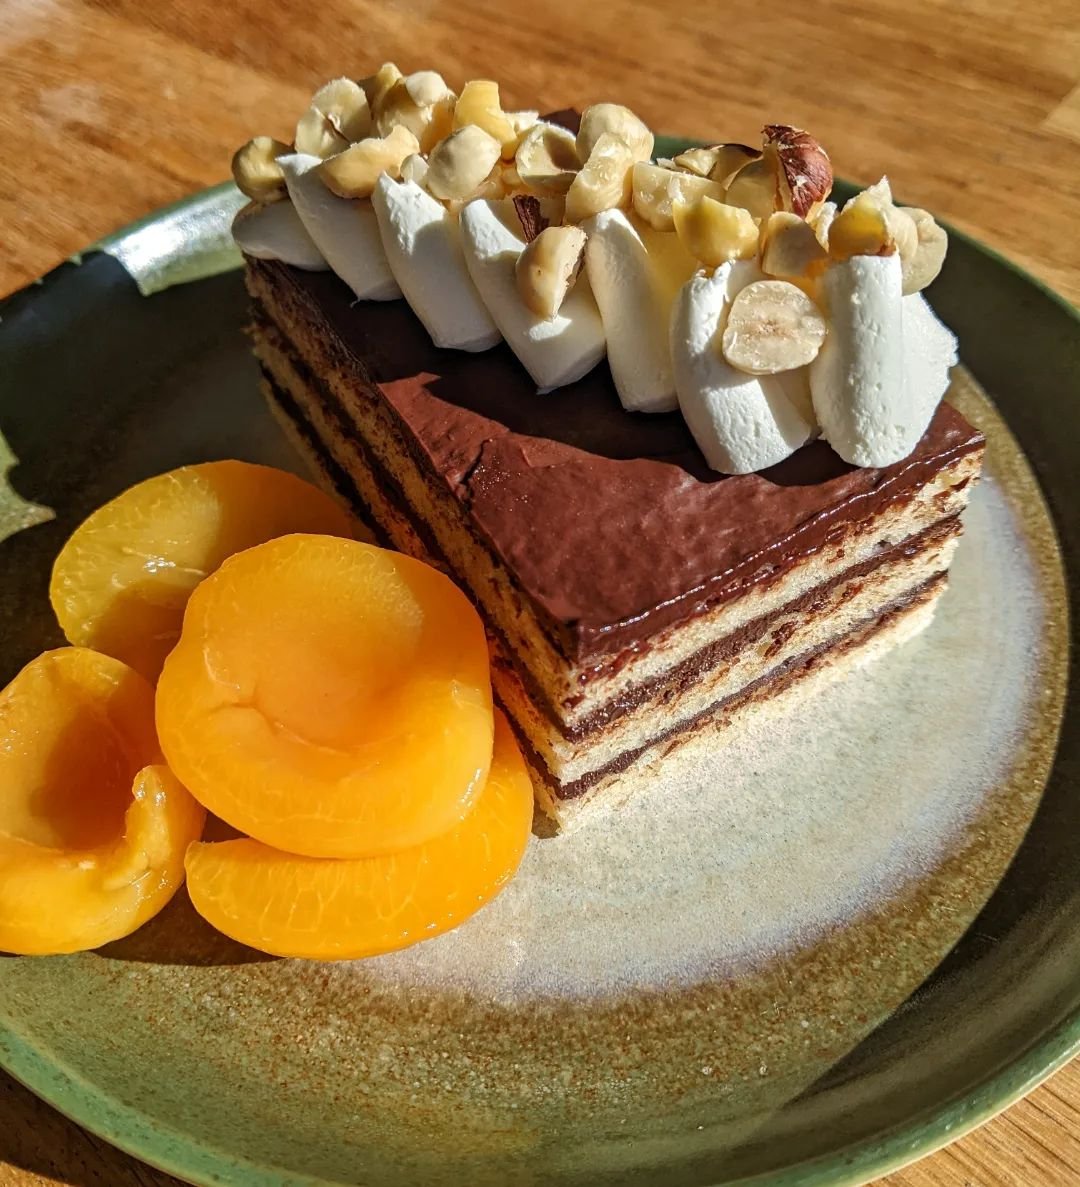 Maybe Summer really has arrived?! ☀️ hazelnut and dark chocolate layered cake, with mascarpone and preserved apricots 🧡